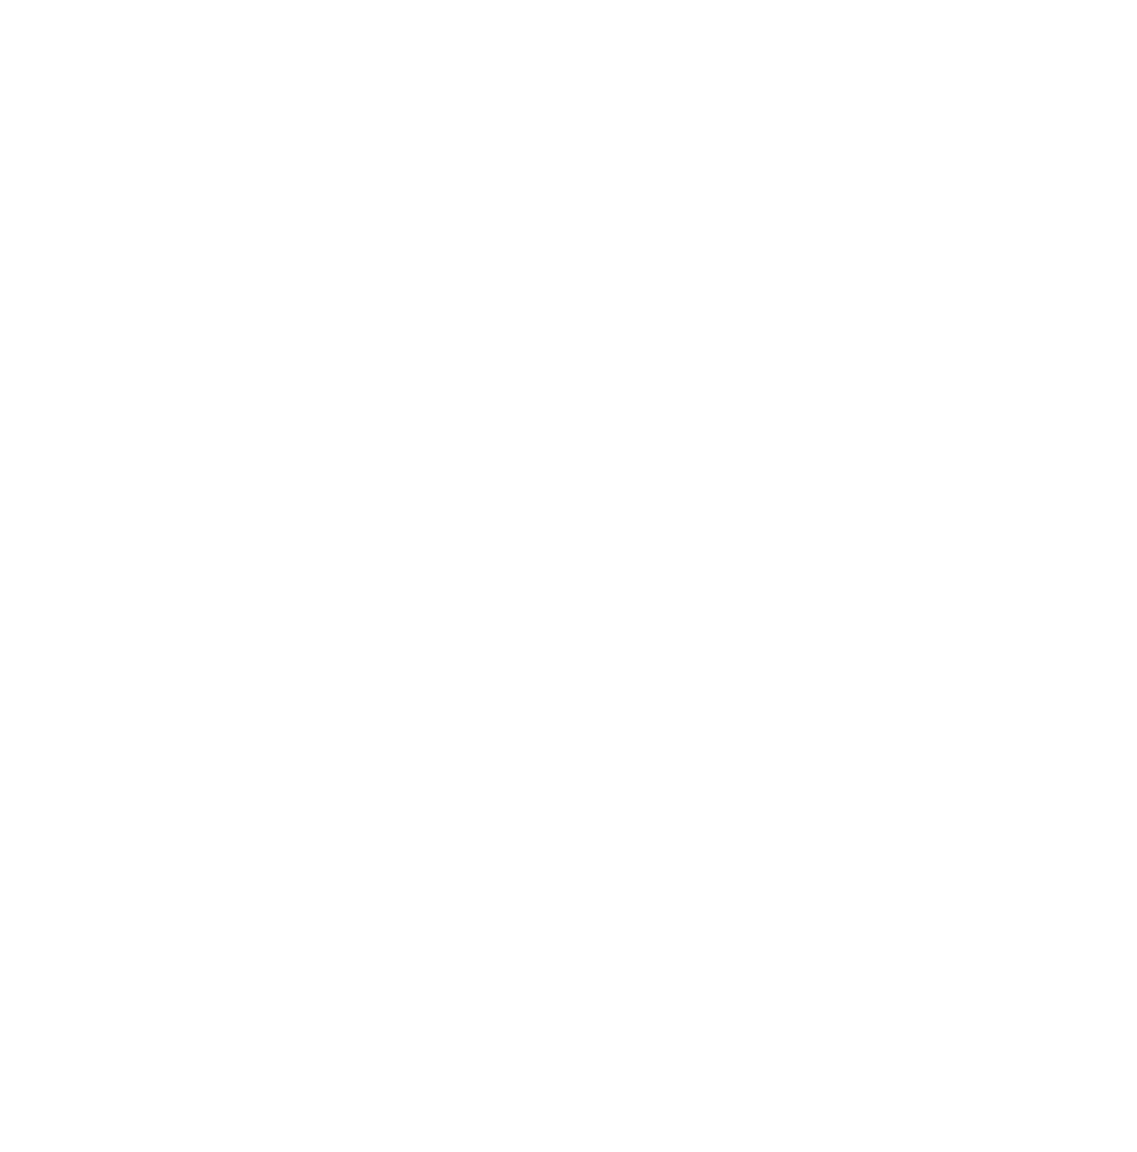 Candid Goat Productions